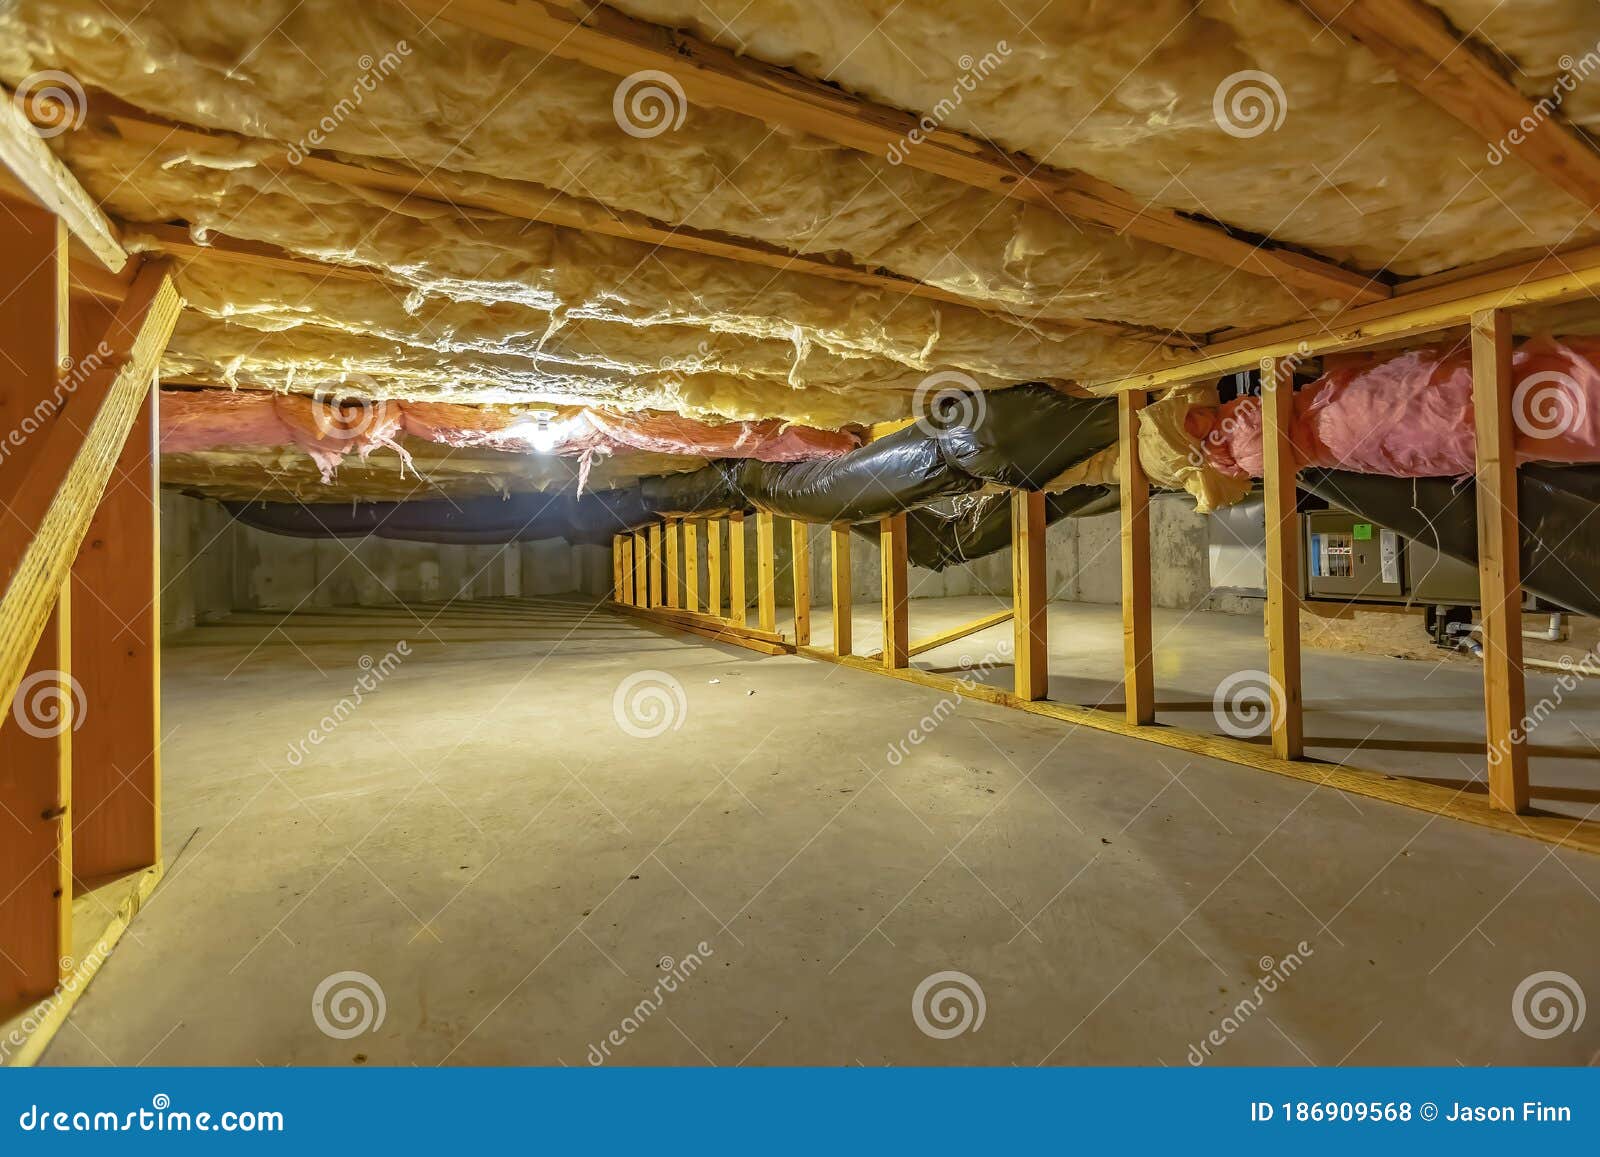 basement or crawl space with upper floor insulation and wooden support beams